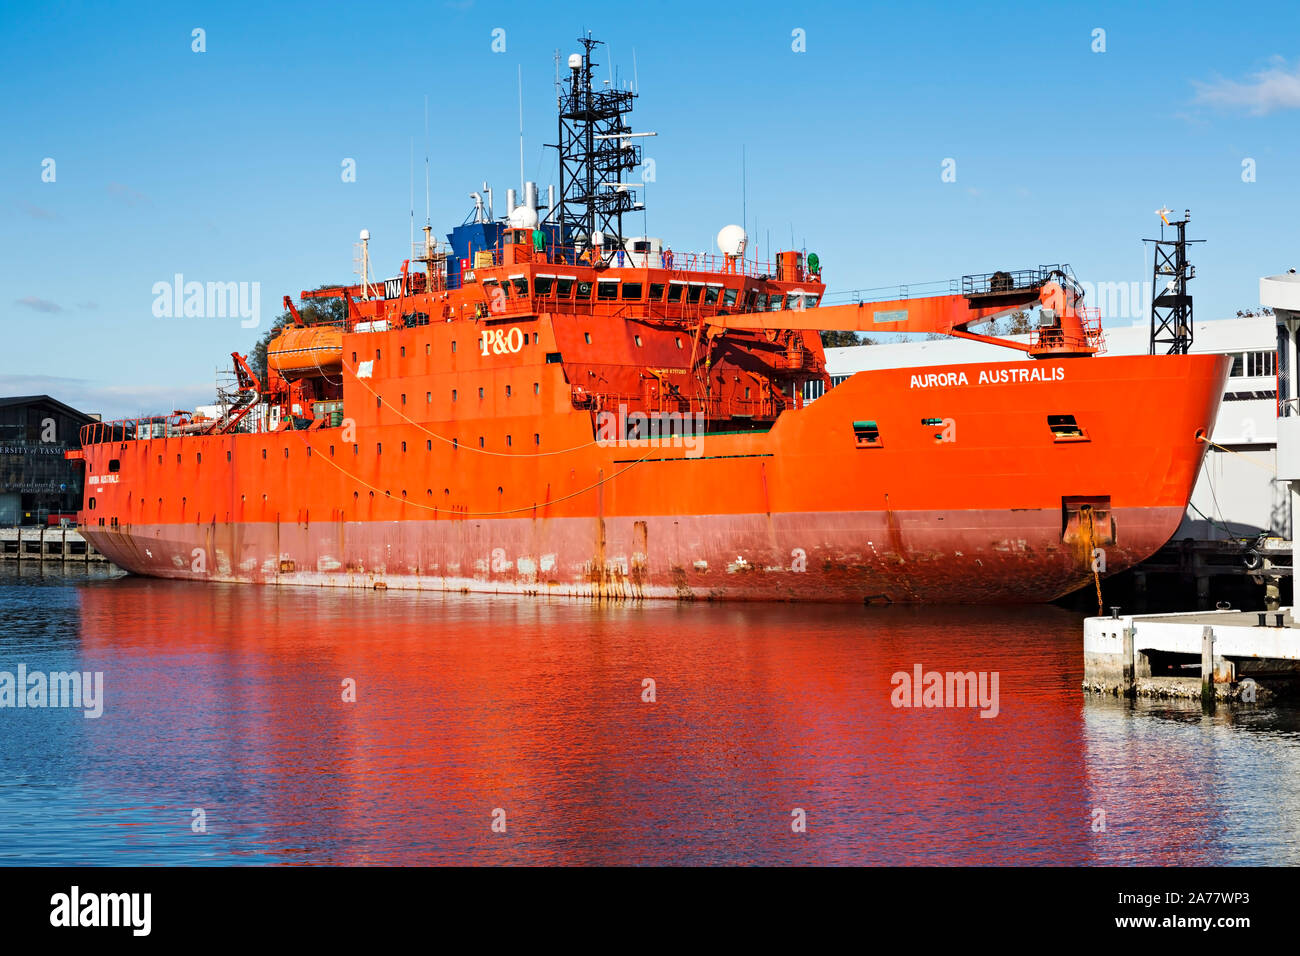 Hobart Australia / The Aurora Australis berthed in Hobart Tasmania.The ship is used for Antarctic research and transport supplies to Australian bases Stock Photo